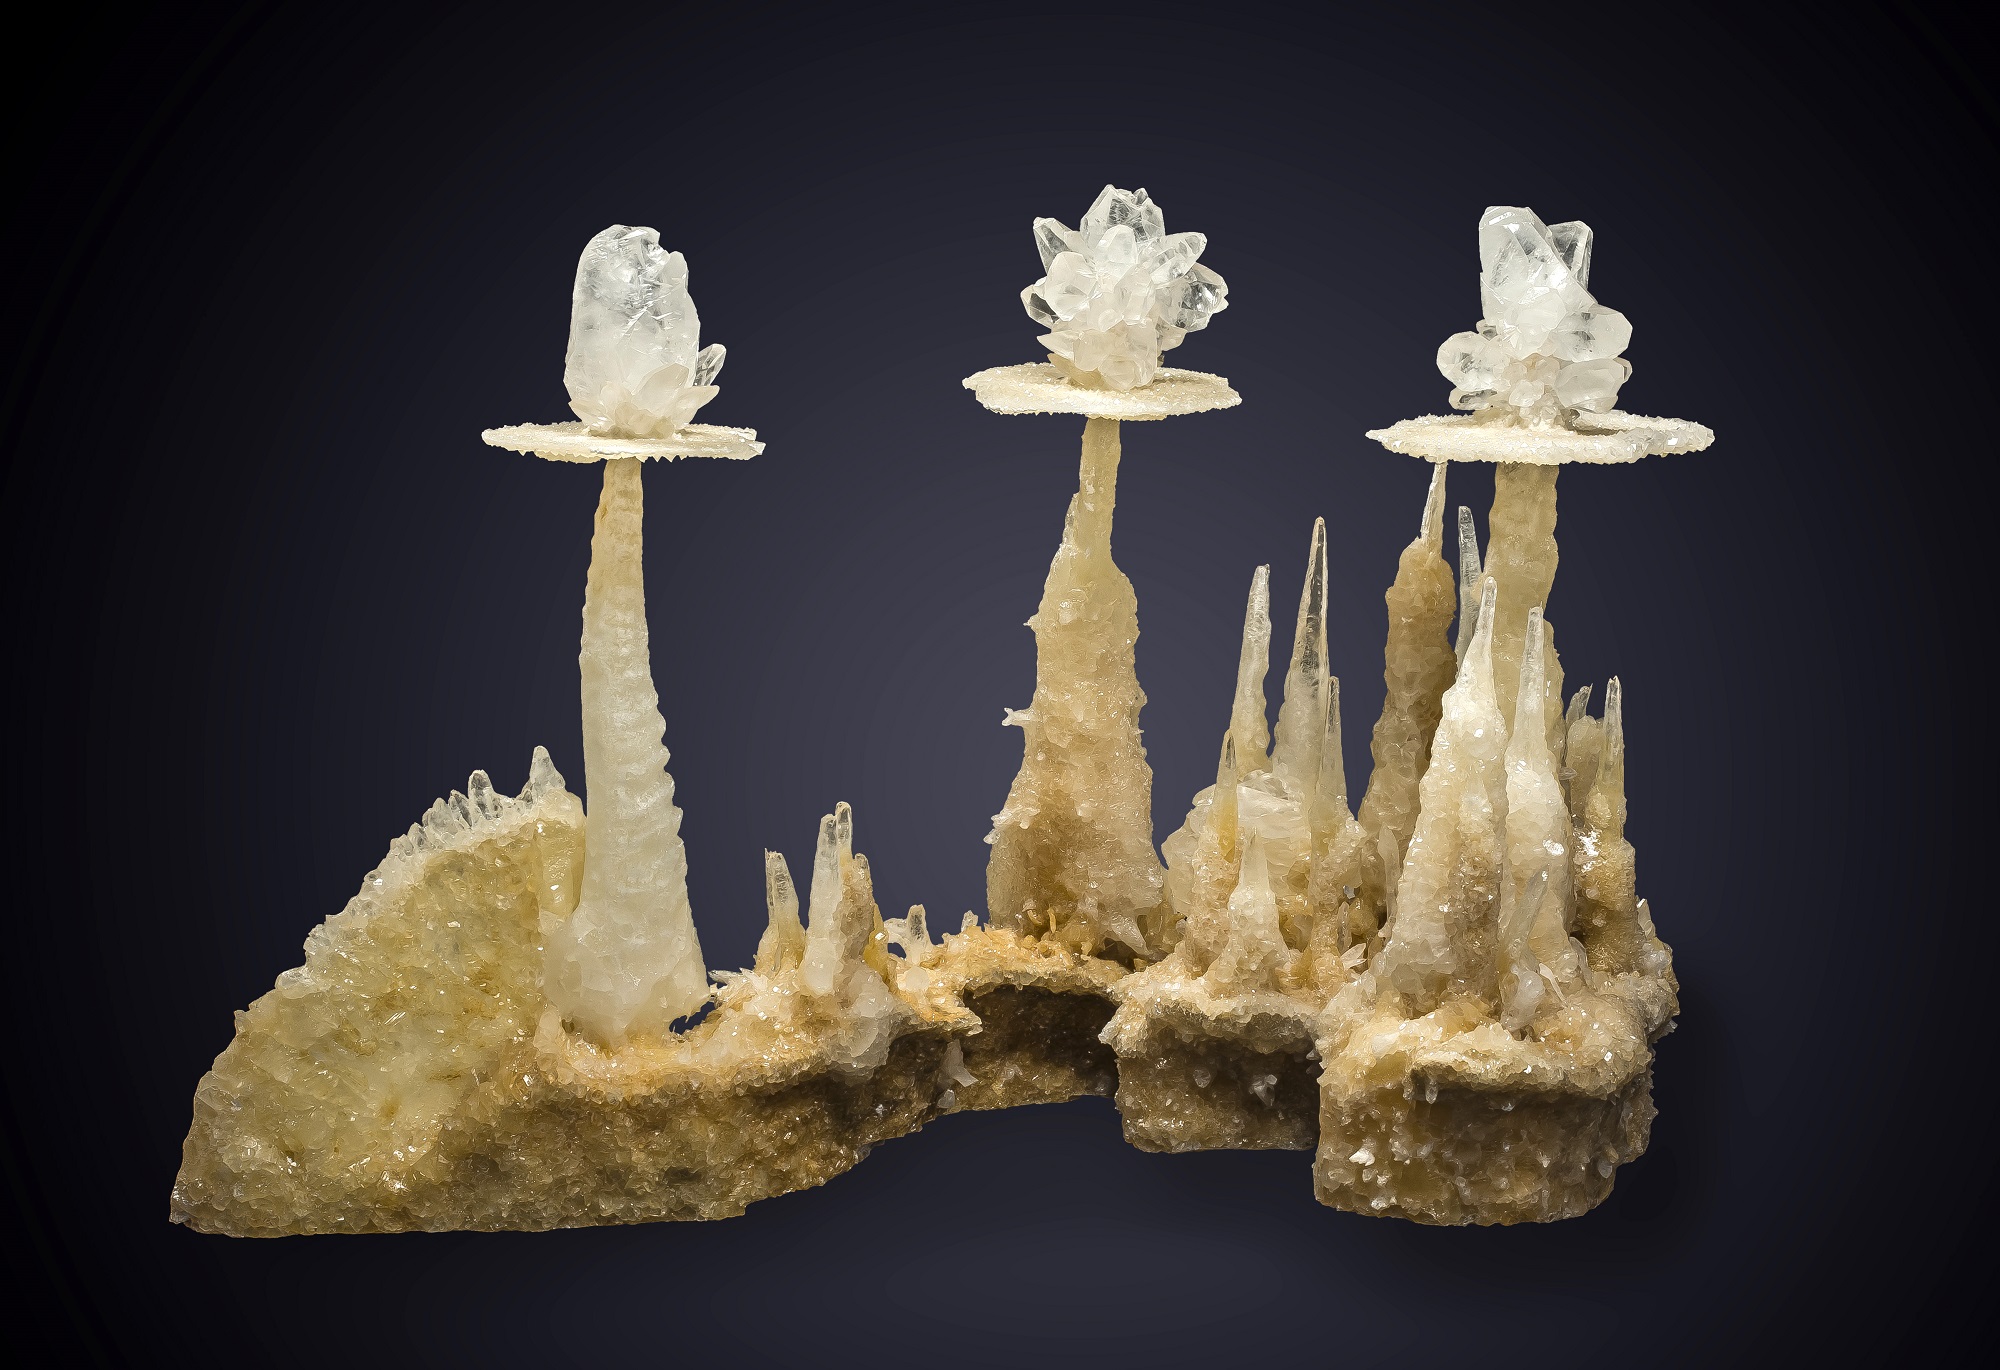 Stacks of white calcite on a black background in a mineral catalog